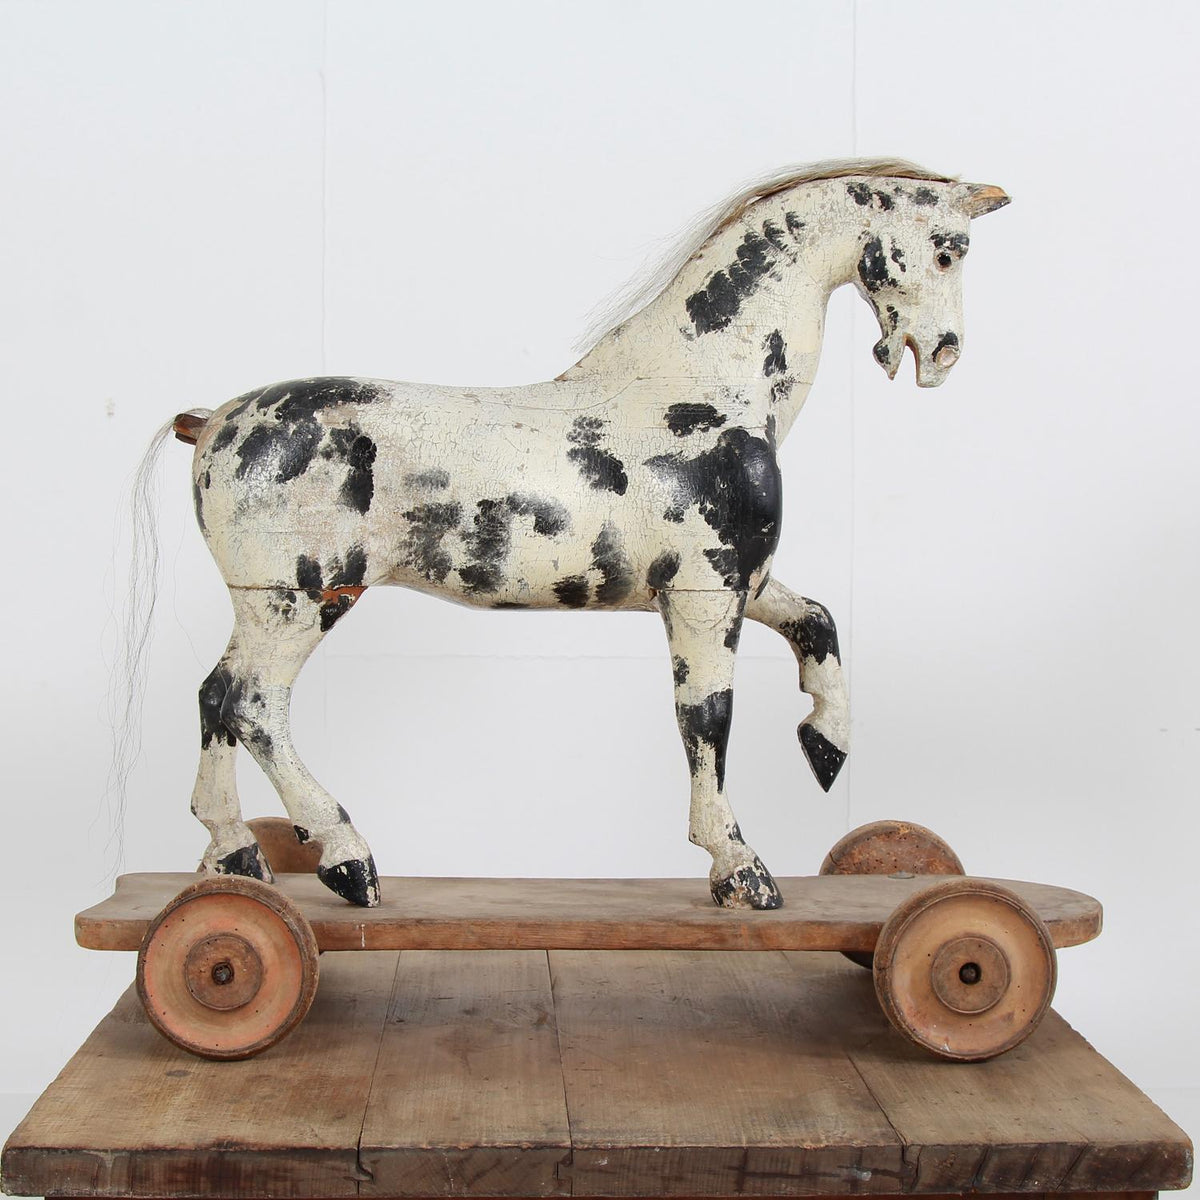 Antique 19thC Horse Sculpture Toy on Wheels with Wood Base